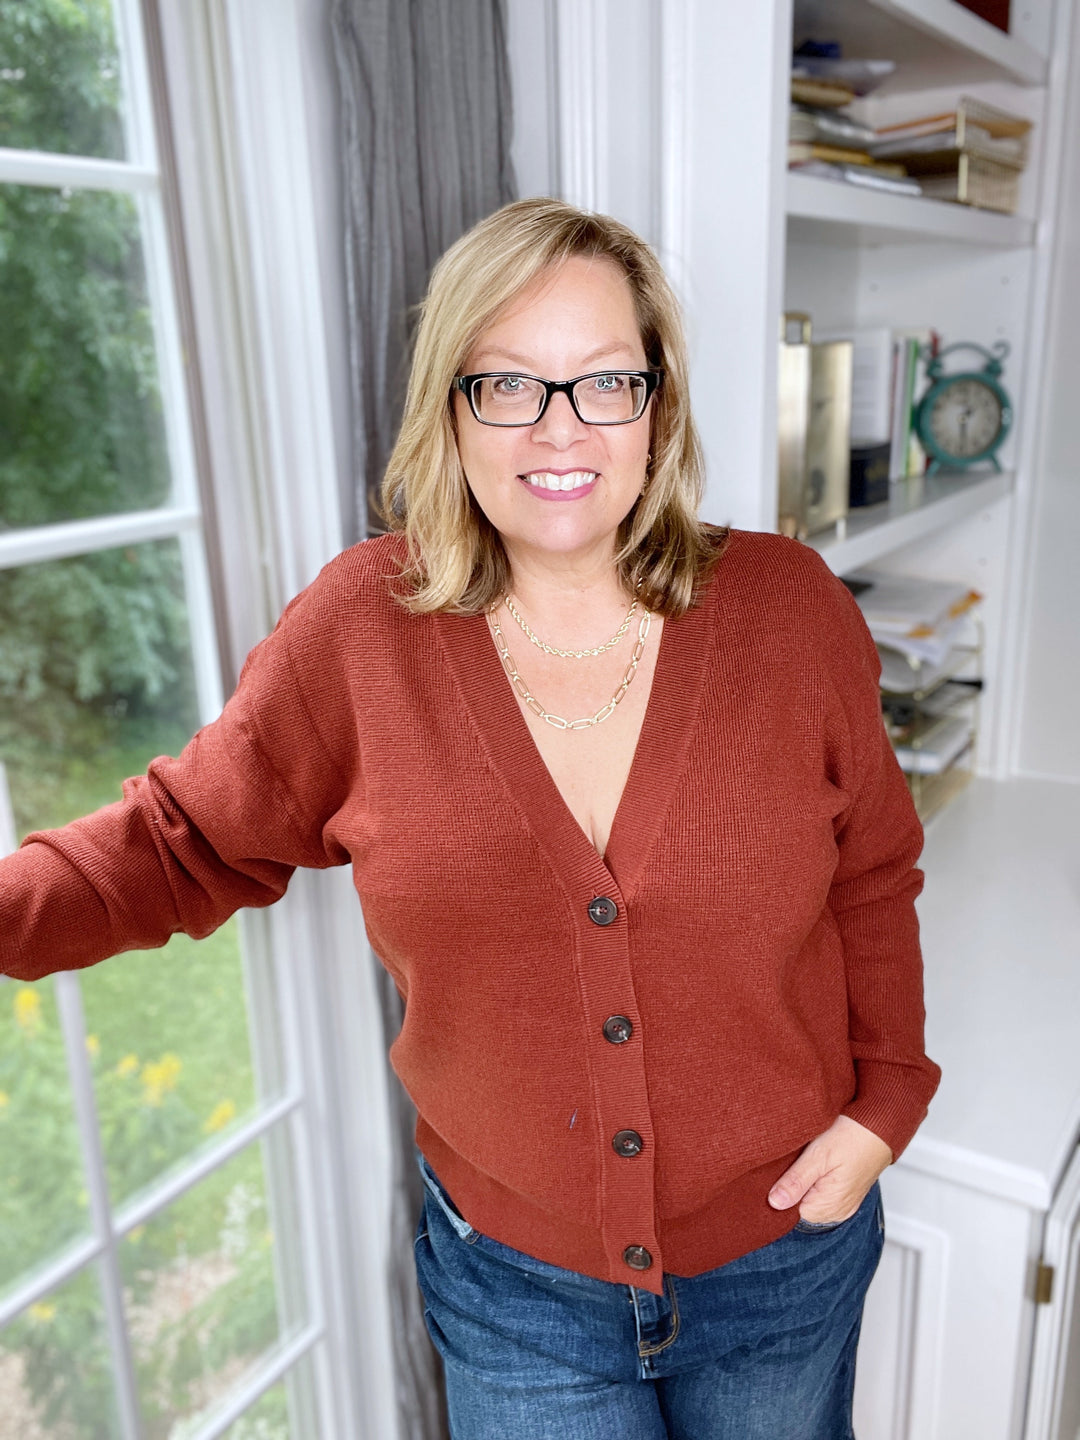 V-Neck Button Down Cardigan in Rust-cardigan-Zenana-Styled by Steph-Women's Fashion Clothing Boutique, Indiana